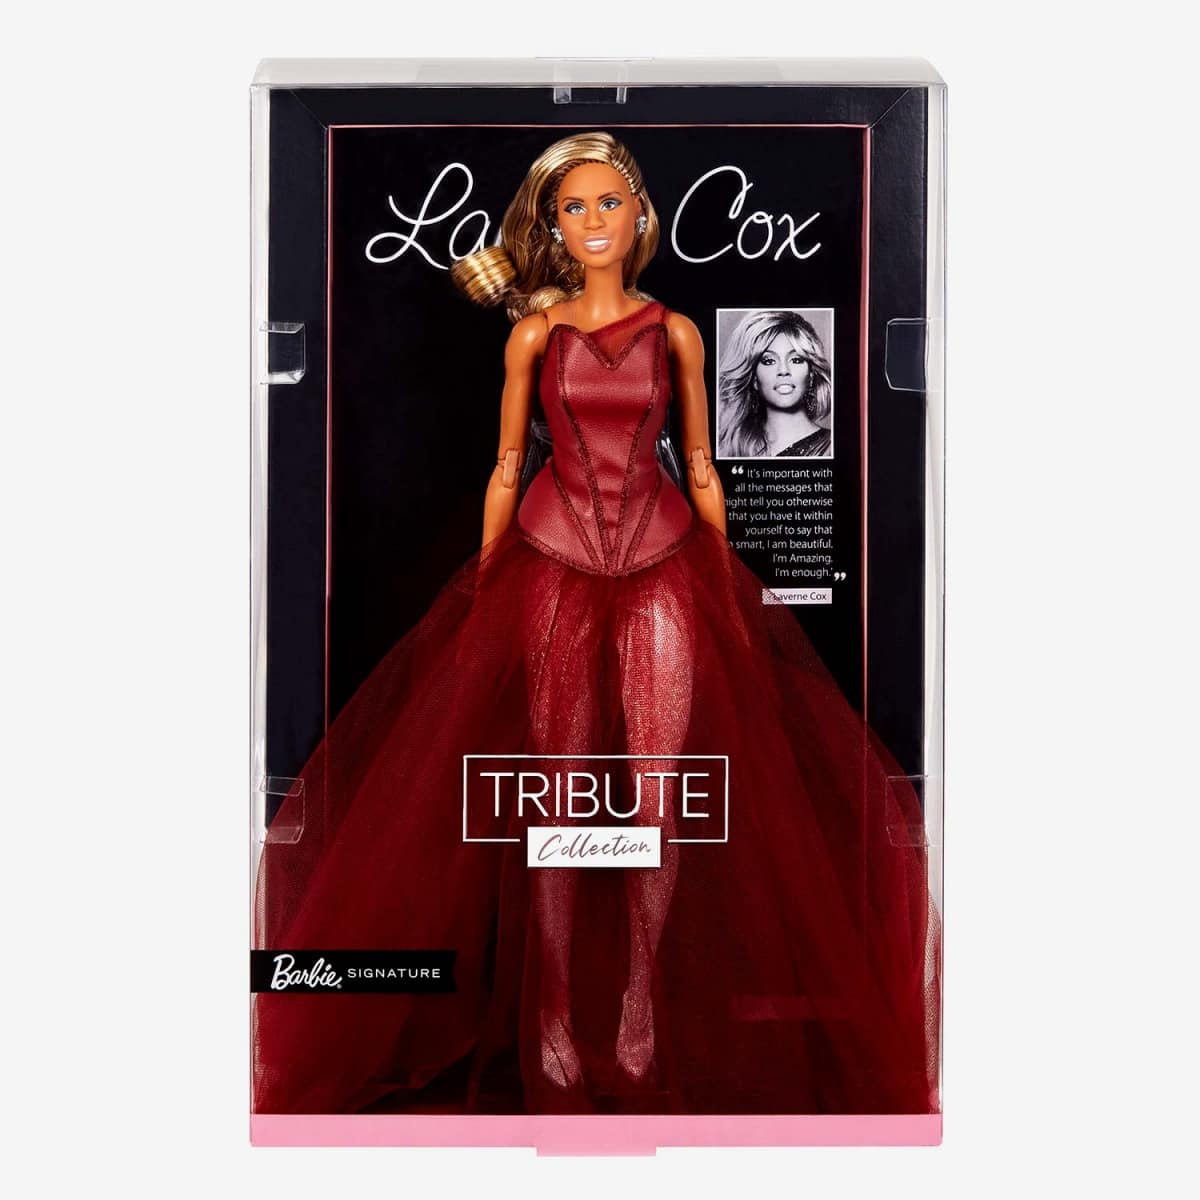 Part of the Tribute Collection, the Laverne Cox doll is Mattel’s first transgender Barbie